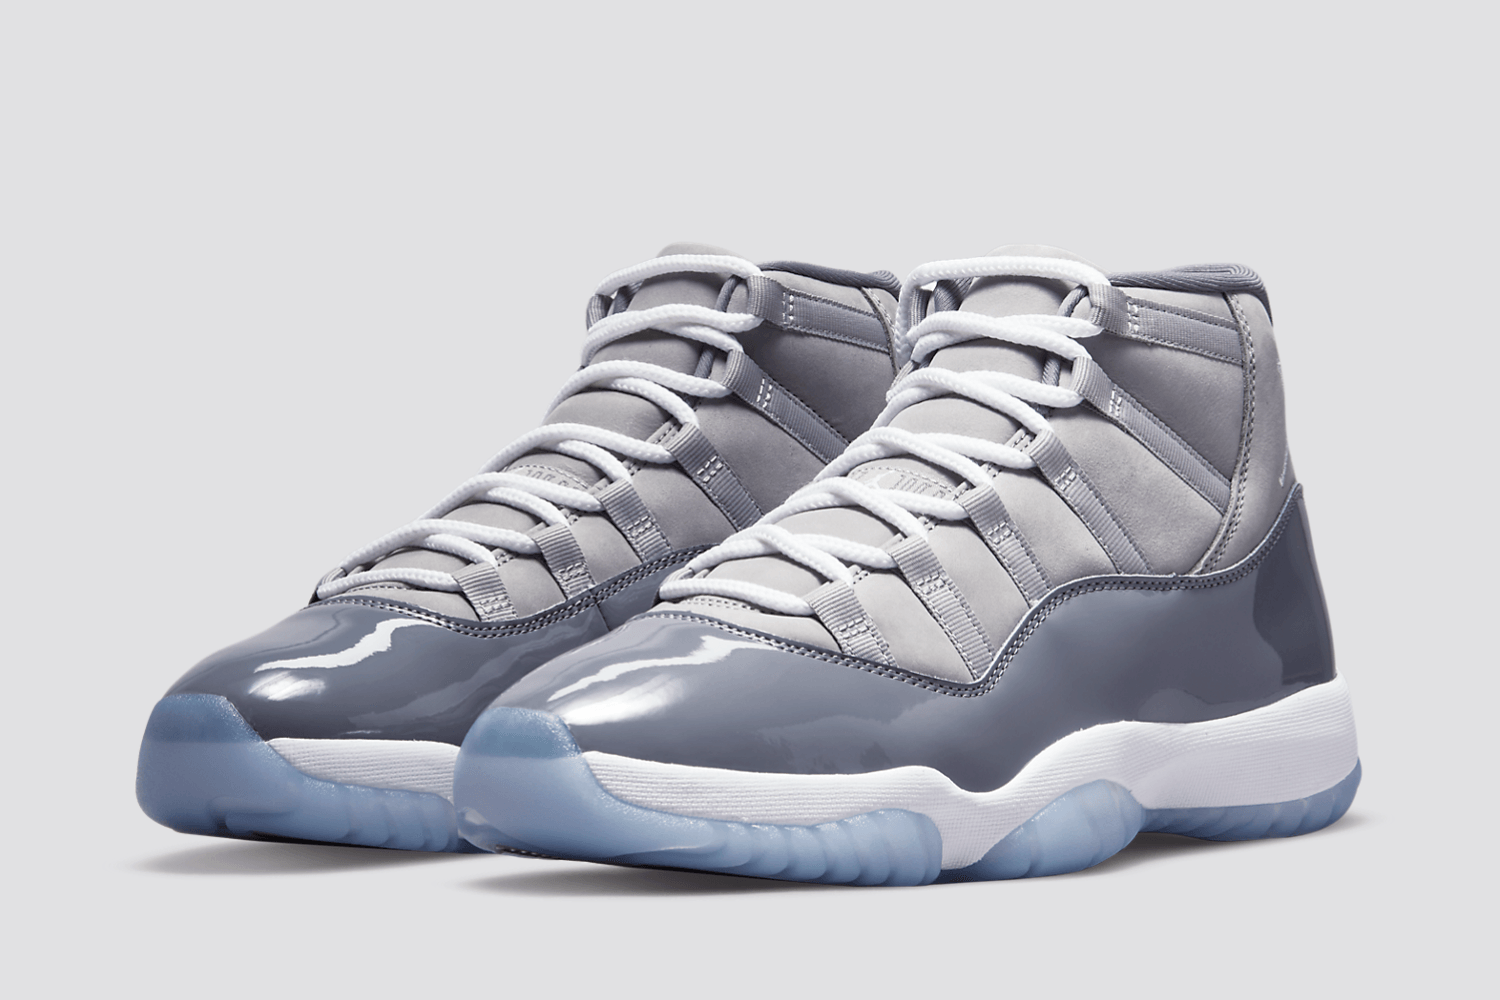 Official pictures of the Air Jordan 11 'Cool Grey